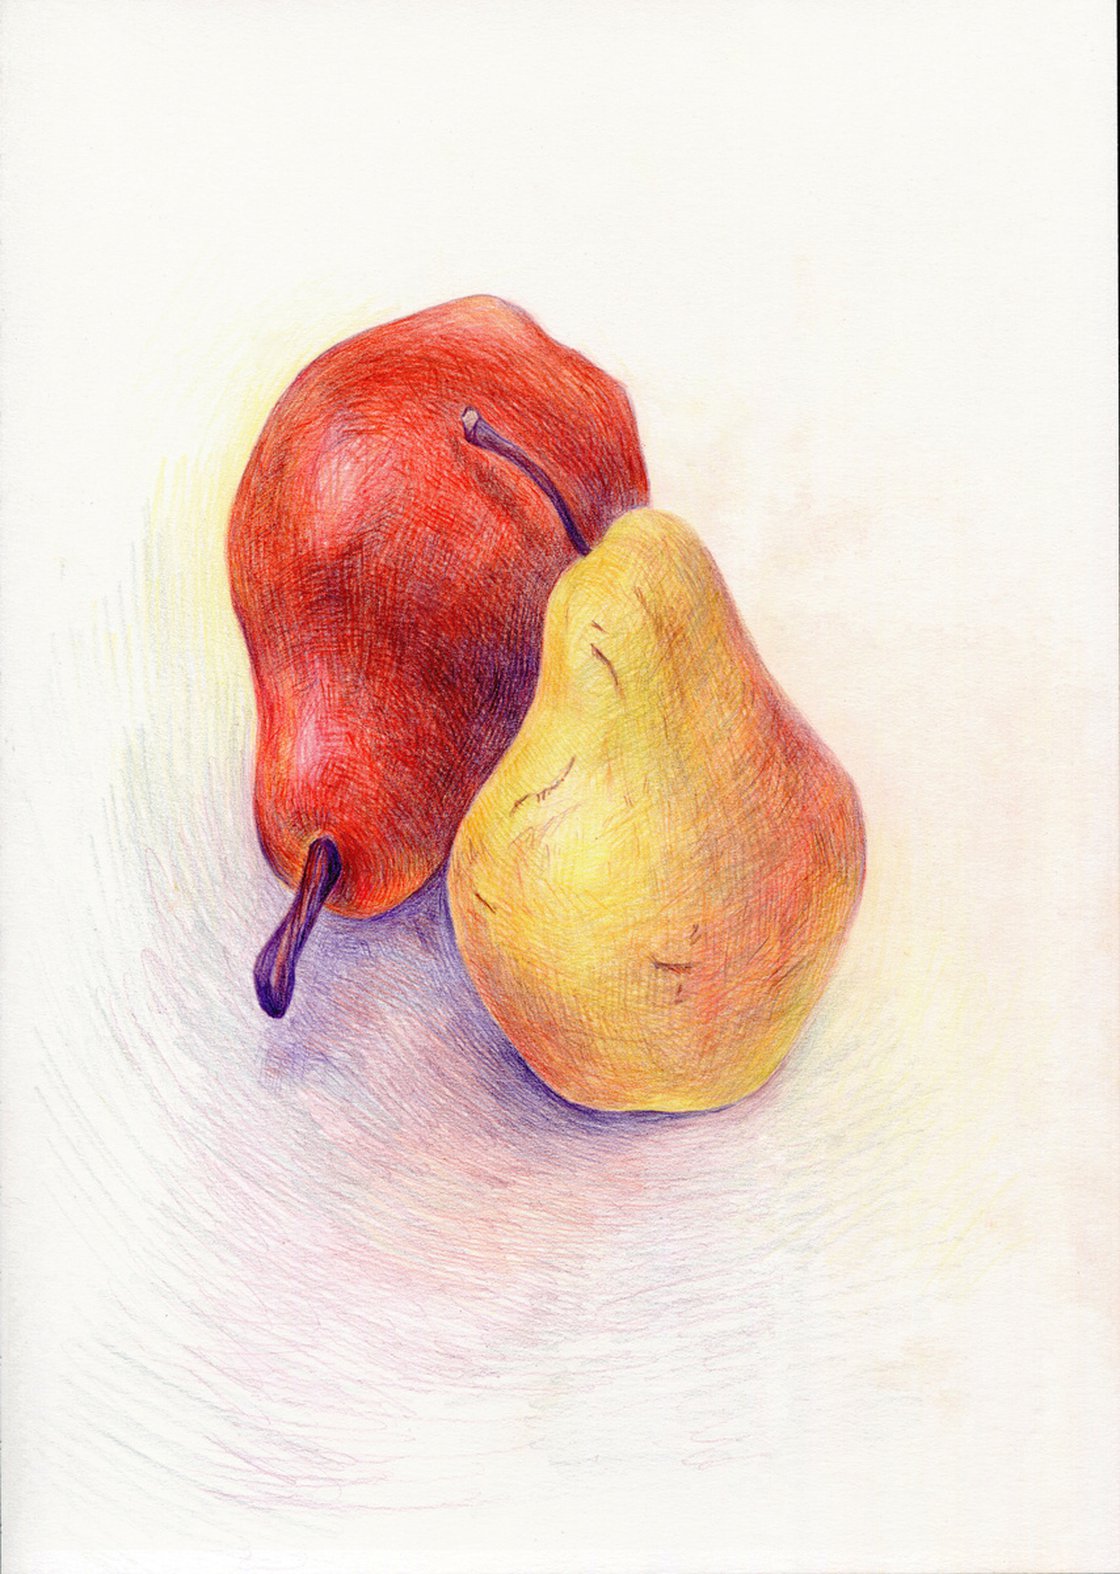 How to Draw a Pear with Colored Pencils